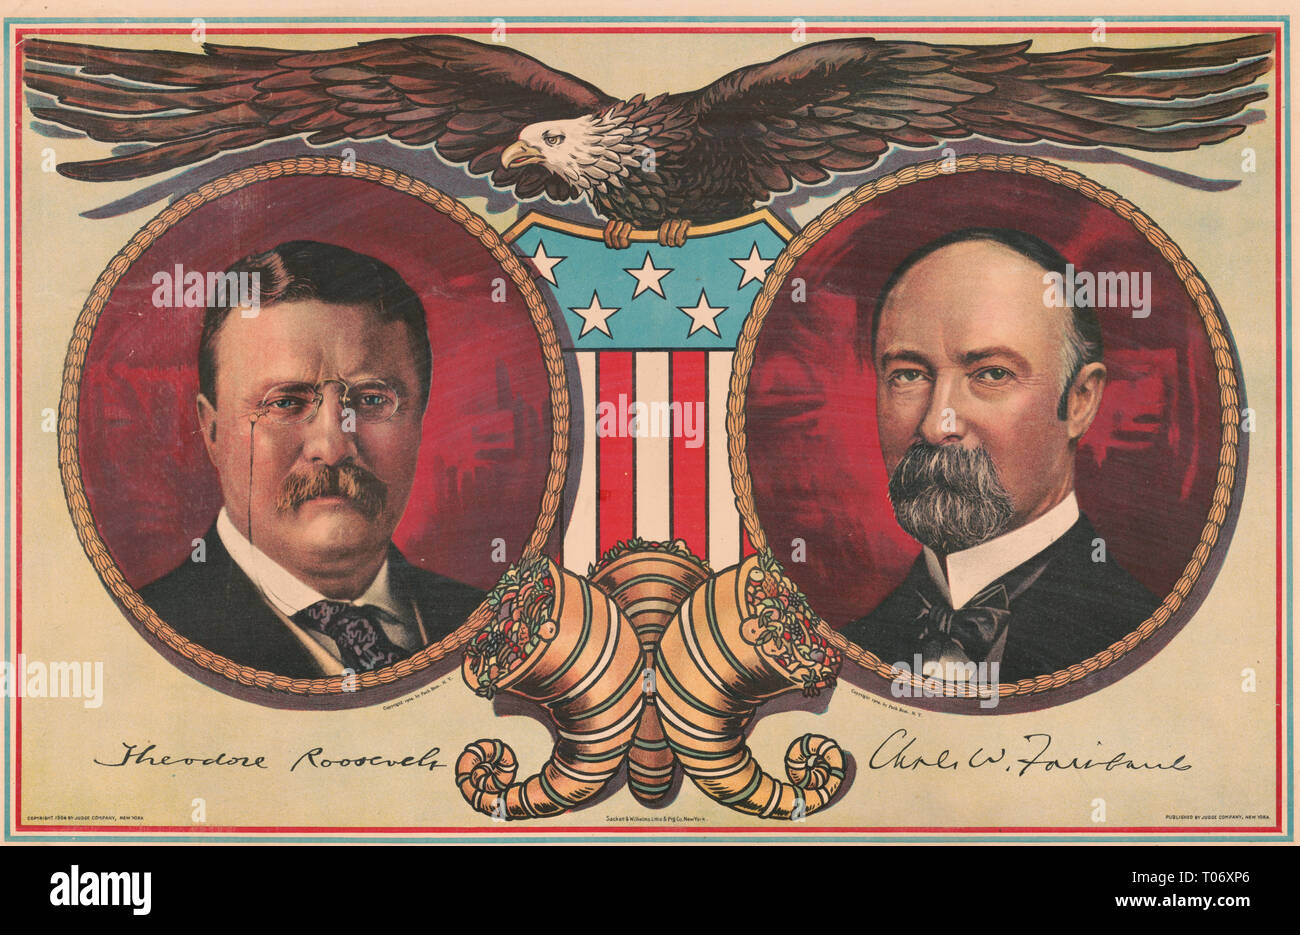 Print shows political campaign poster with bust portraits of, on the left, Theodore Roosevelt, for president, and, on the right, Charles W. Fairbanks, for vice president, in medallions separated by an eagle holding a stars and stripes shield and, at the bottom, cornucopias. Includes facsimile signatures. 1904 Stock Photo